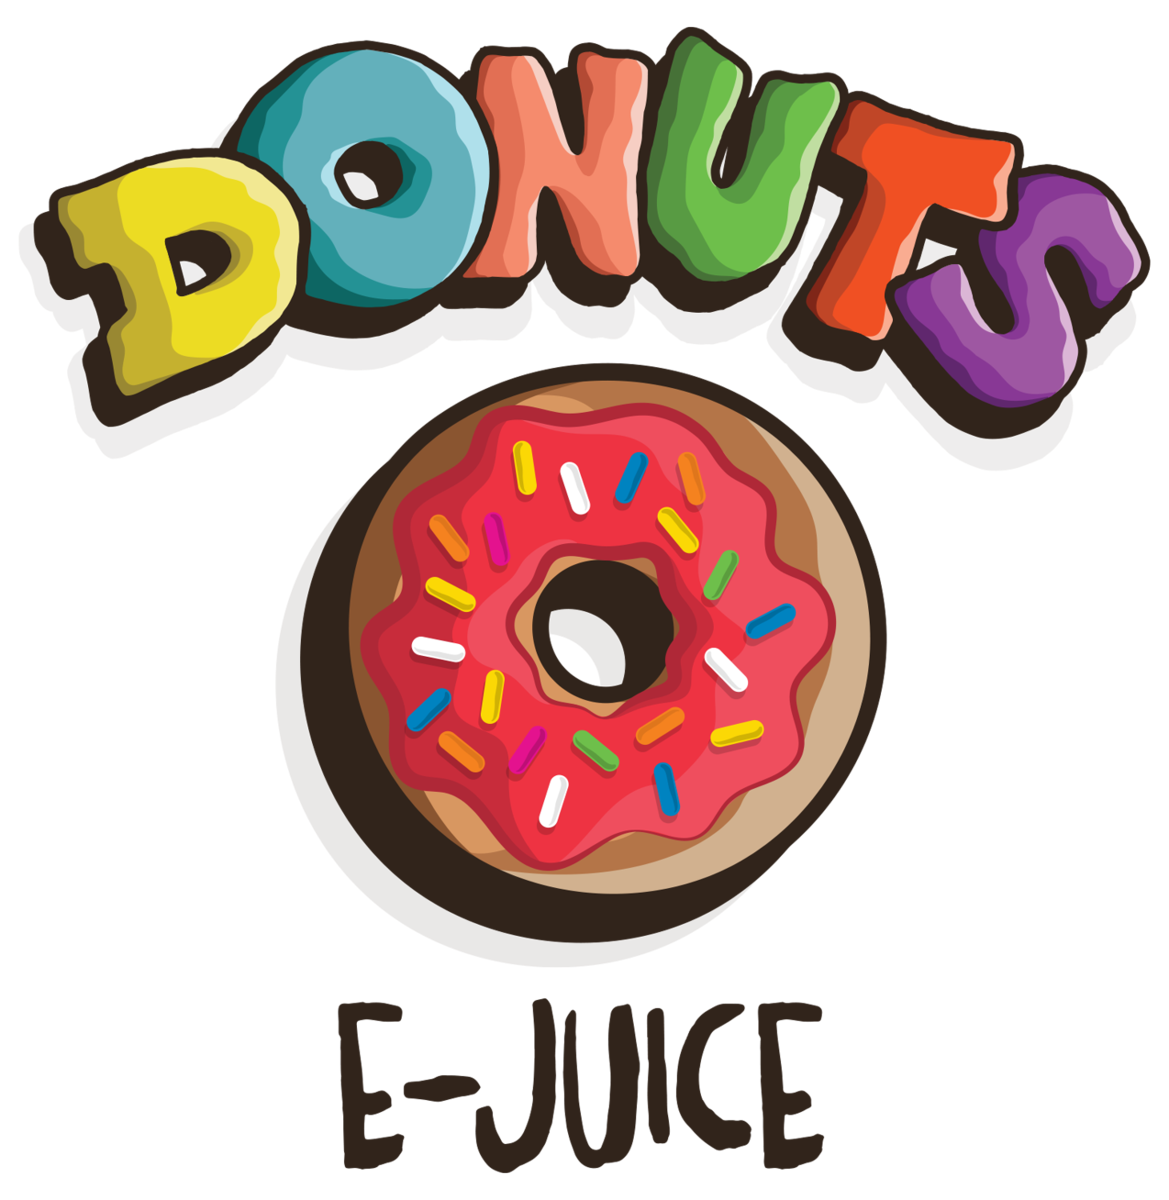 Donuts e vapers club. Donut clipart juice